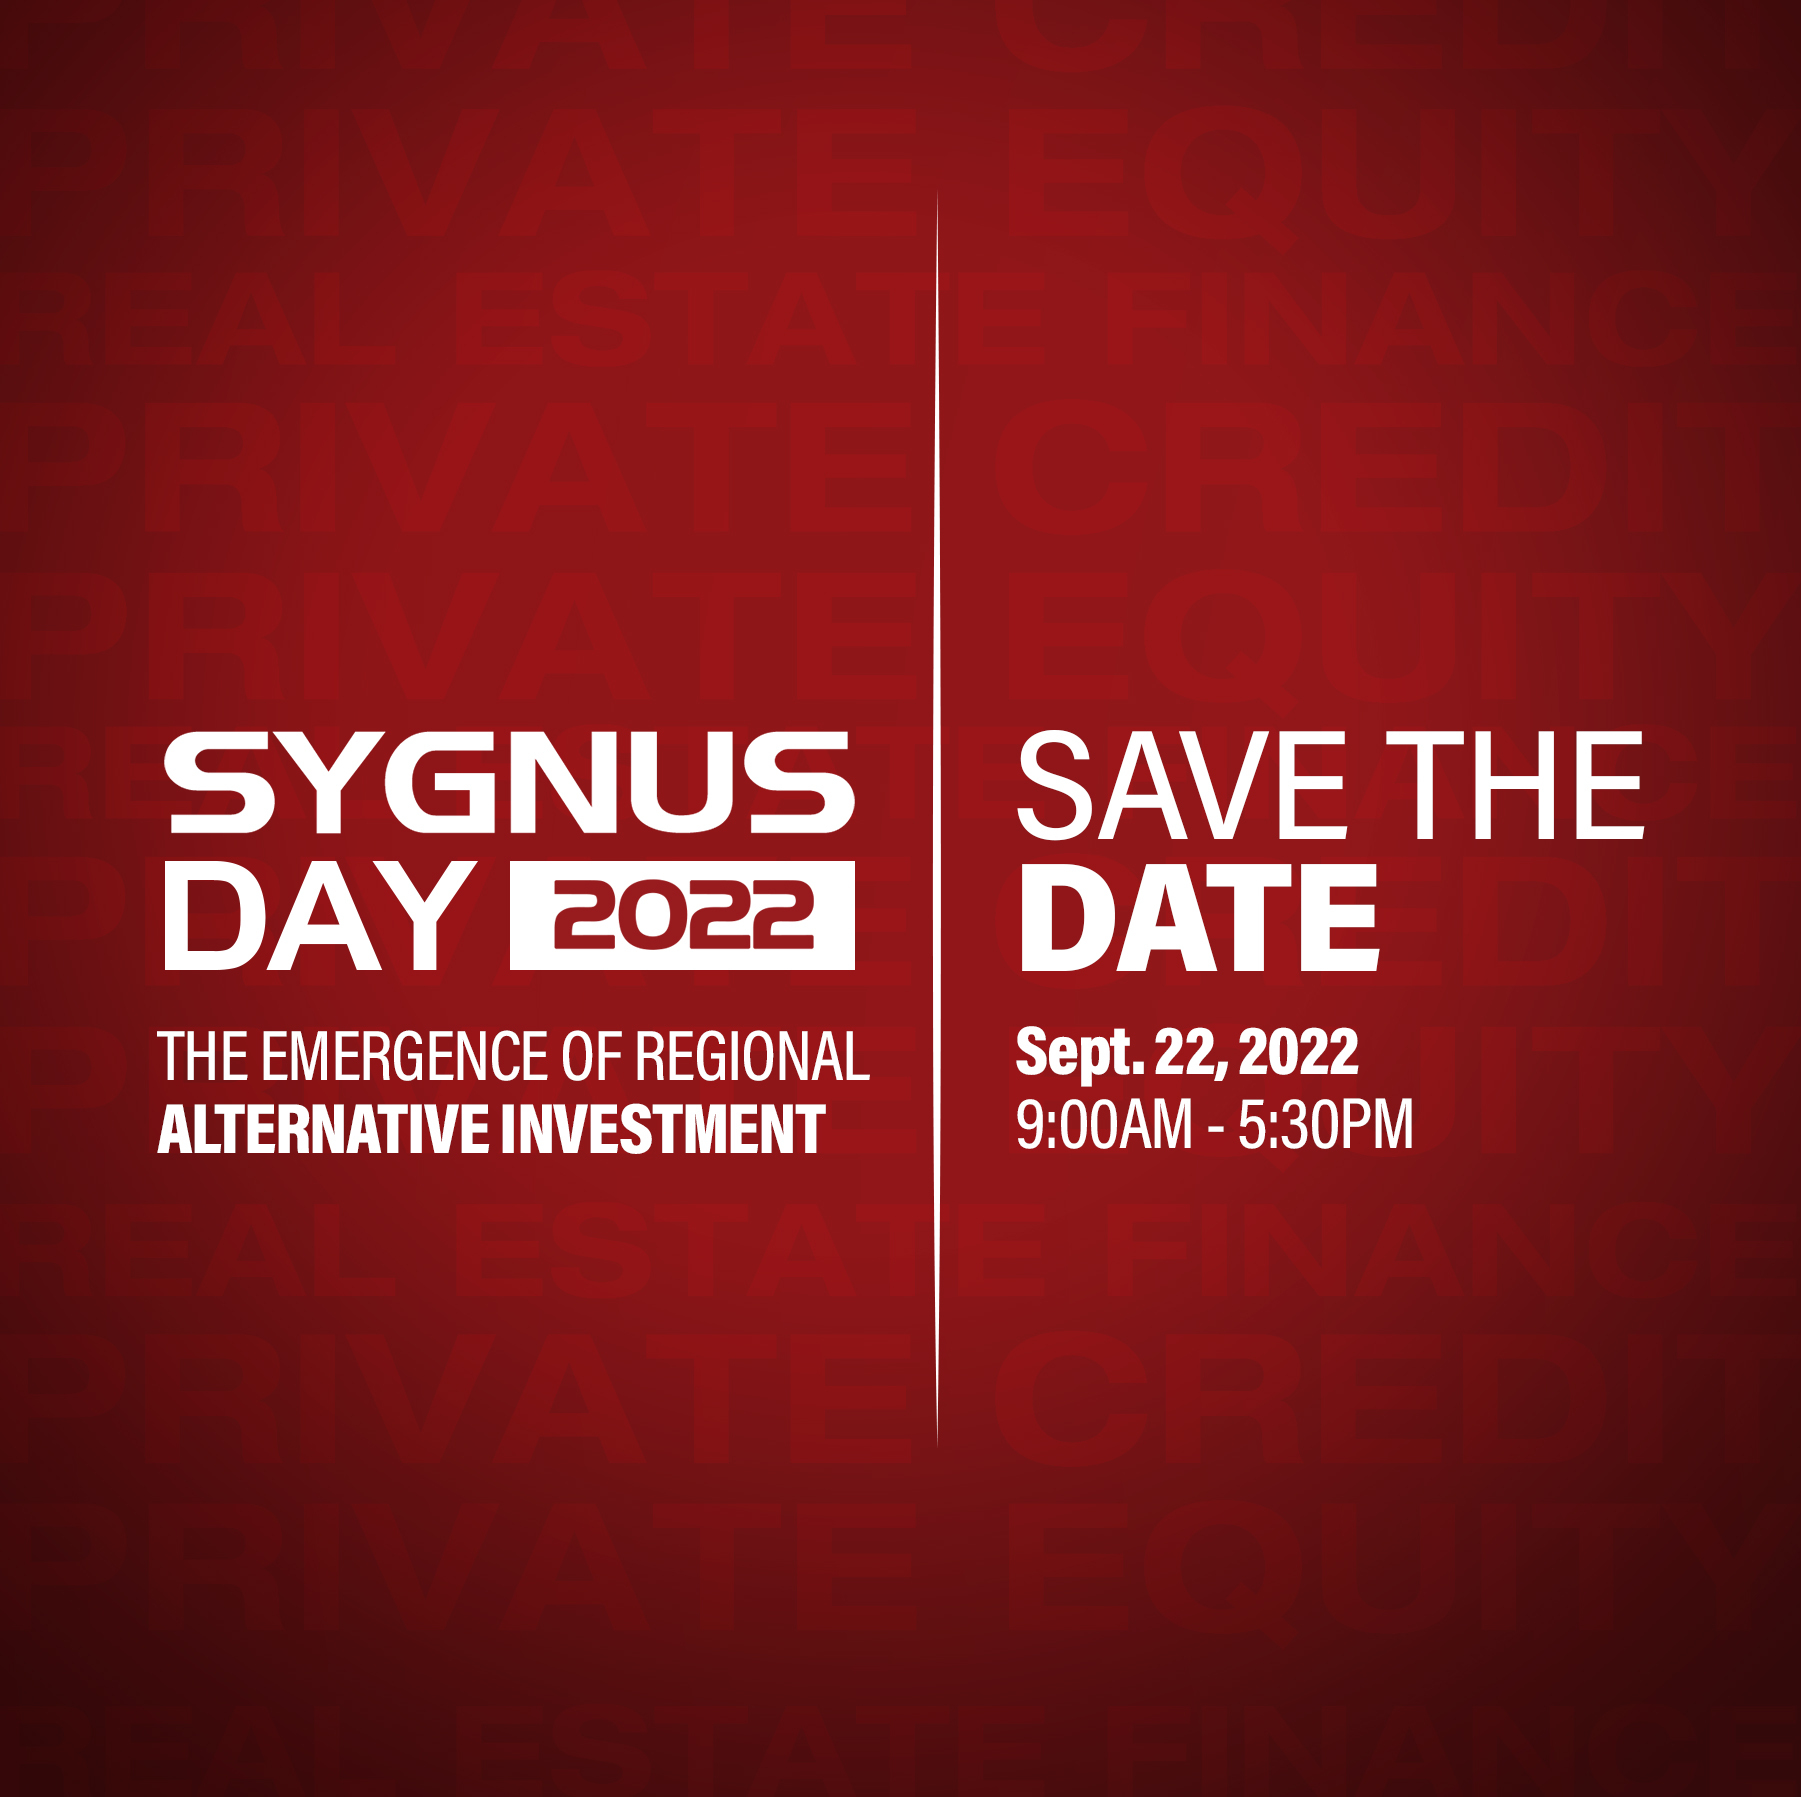 Sygnus Day Conference 2022 on September 22, 9AM - 5:30PM